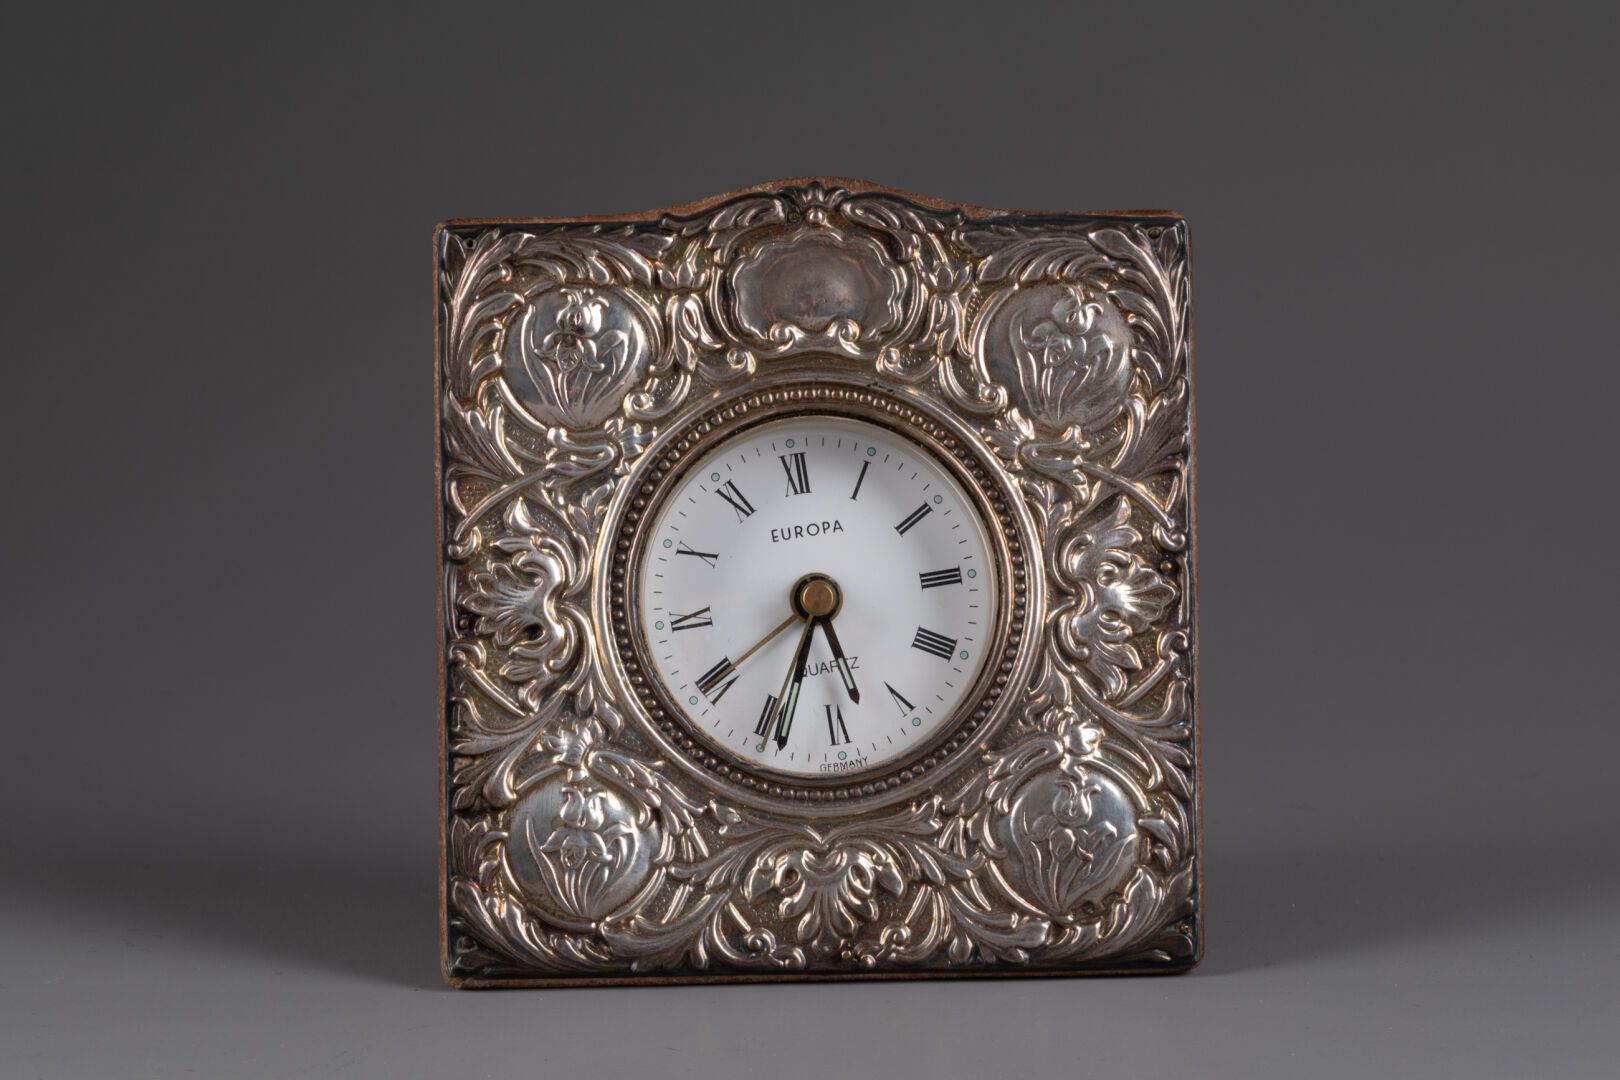 EUROPA Small CLOCK with floral decoration 
The dial indicating the hours in Roma&hellip;